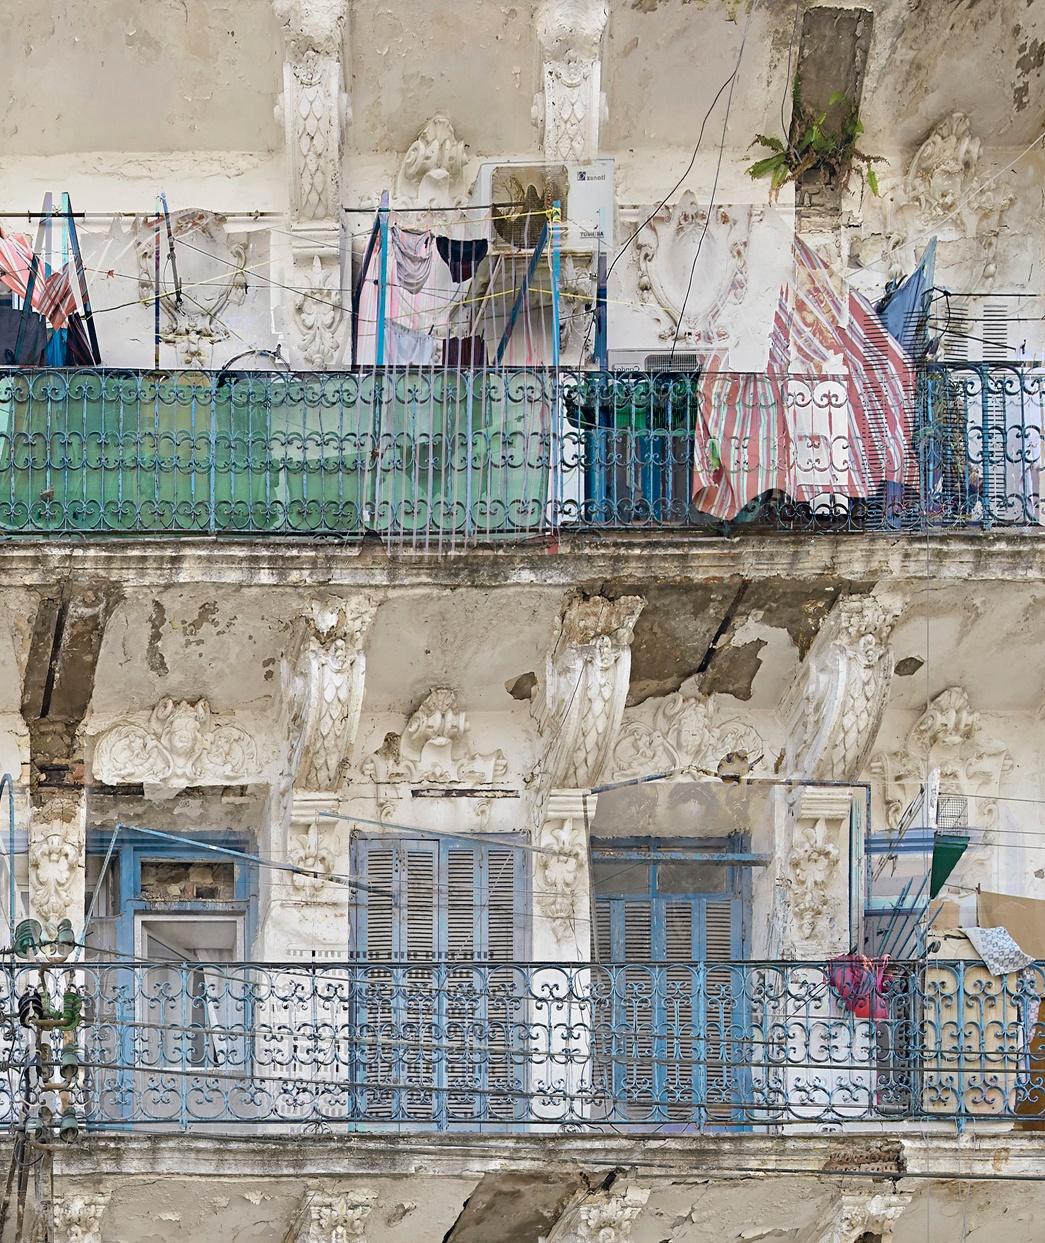 Stéphane COUTURIER (*1957, France)
Alger – Bab El Oued – Melting Point n°2, 2015
C-print in Artist's frame
180 x 152 cm (70 7/8 x 59 7/8 in.)
Edition of 5; Ed. no. 2/5
Framed

Born in 1957 in Neuilly sur Seine, Stéphane Couturier currently lives and